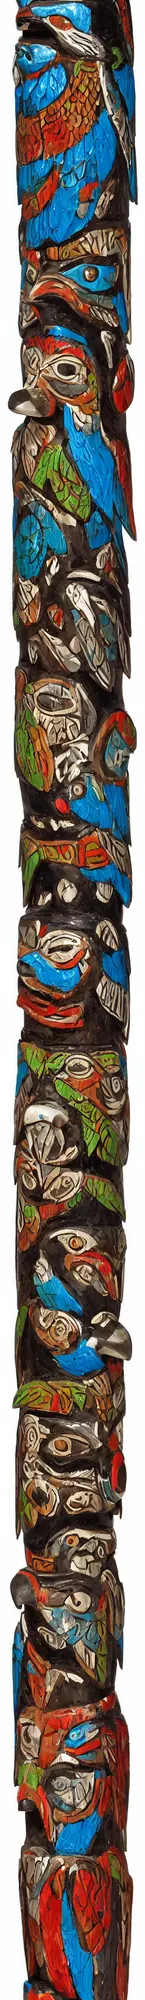 Prompt: elaborate painted carved totem pole with raven, bear, eagle, turtle, frog, moose, caribou